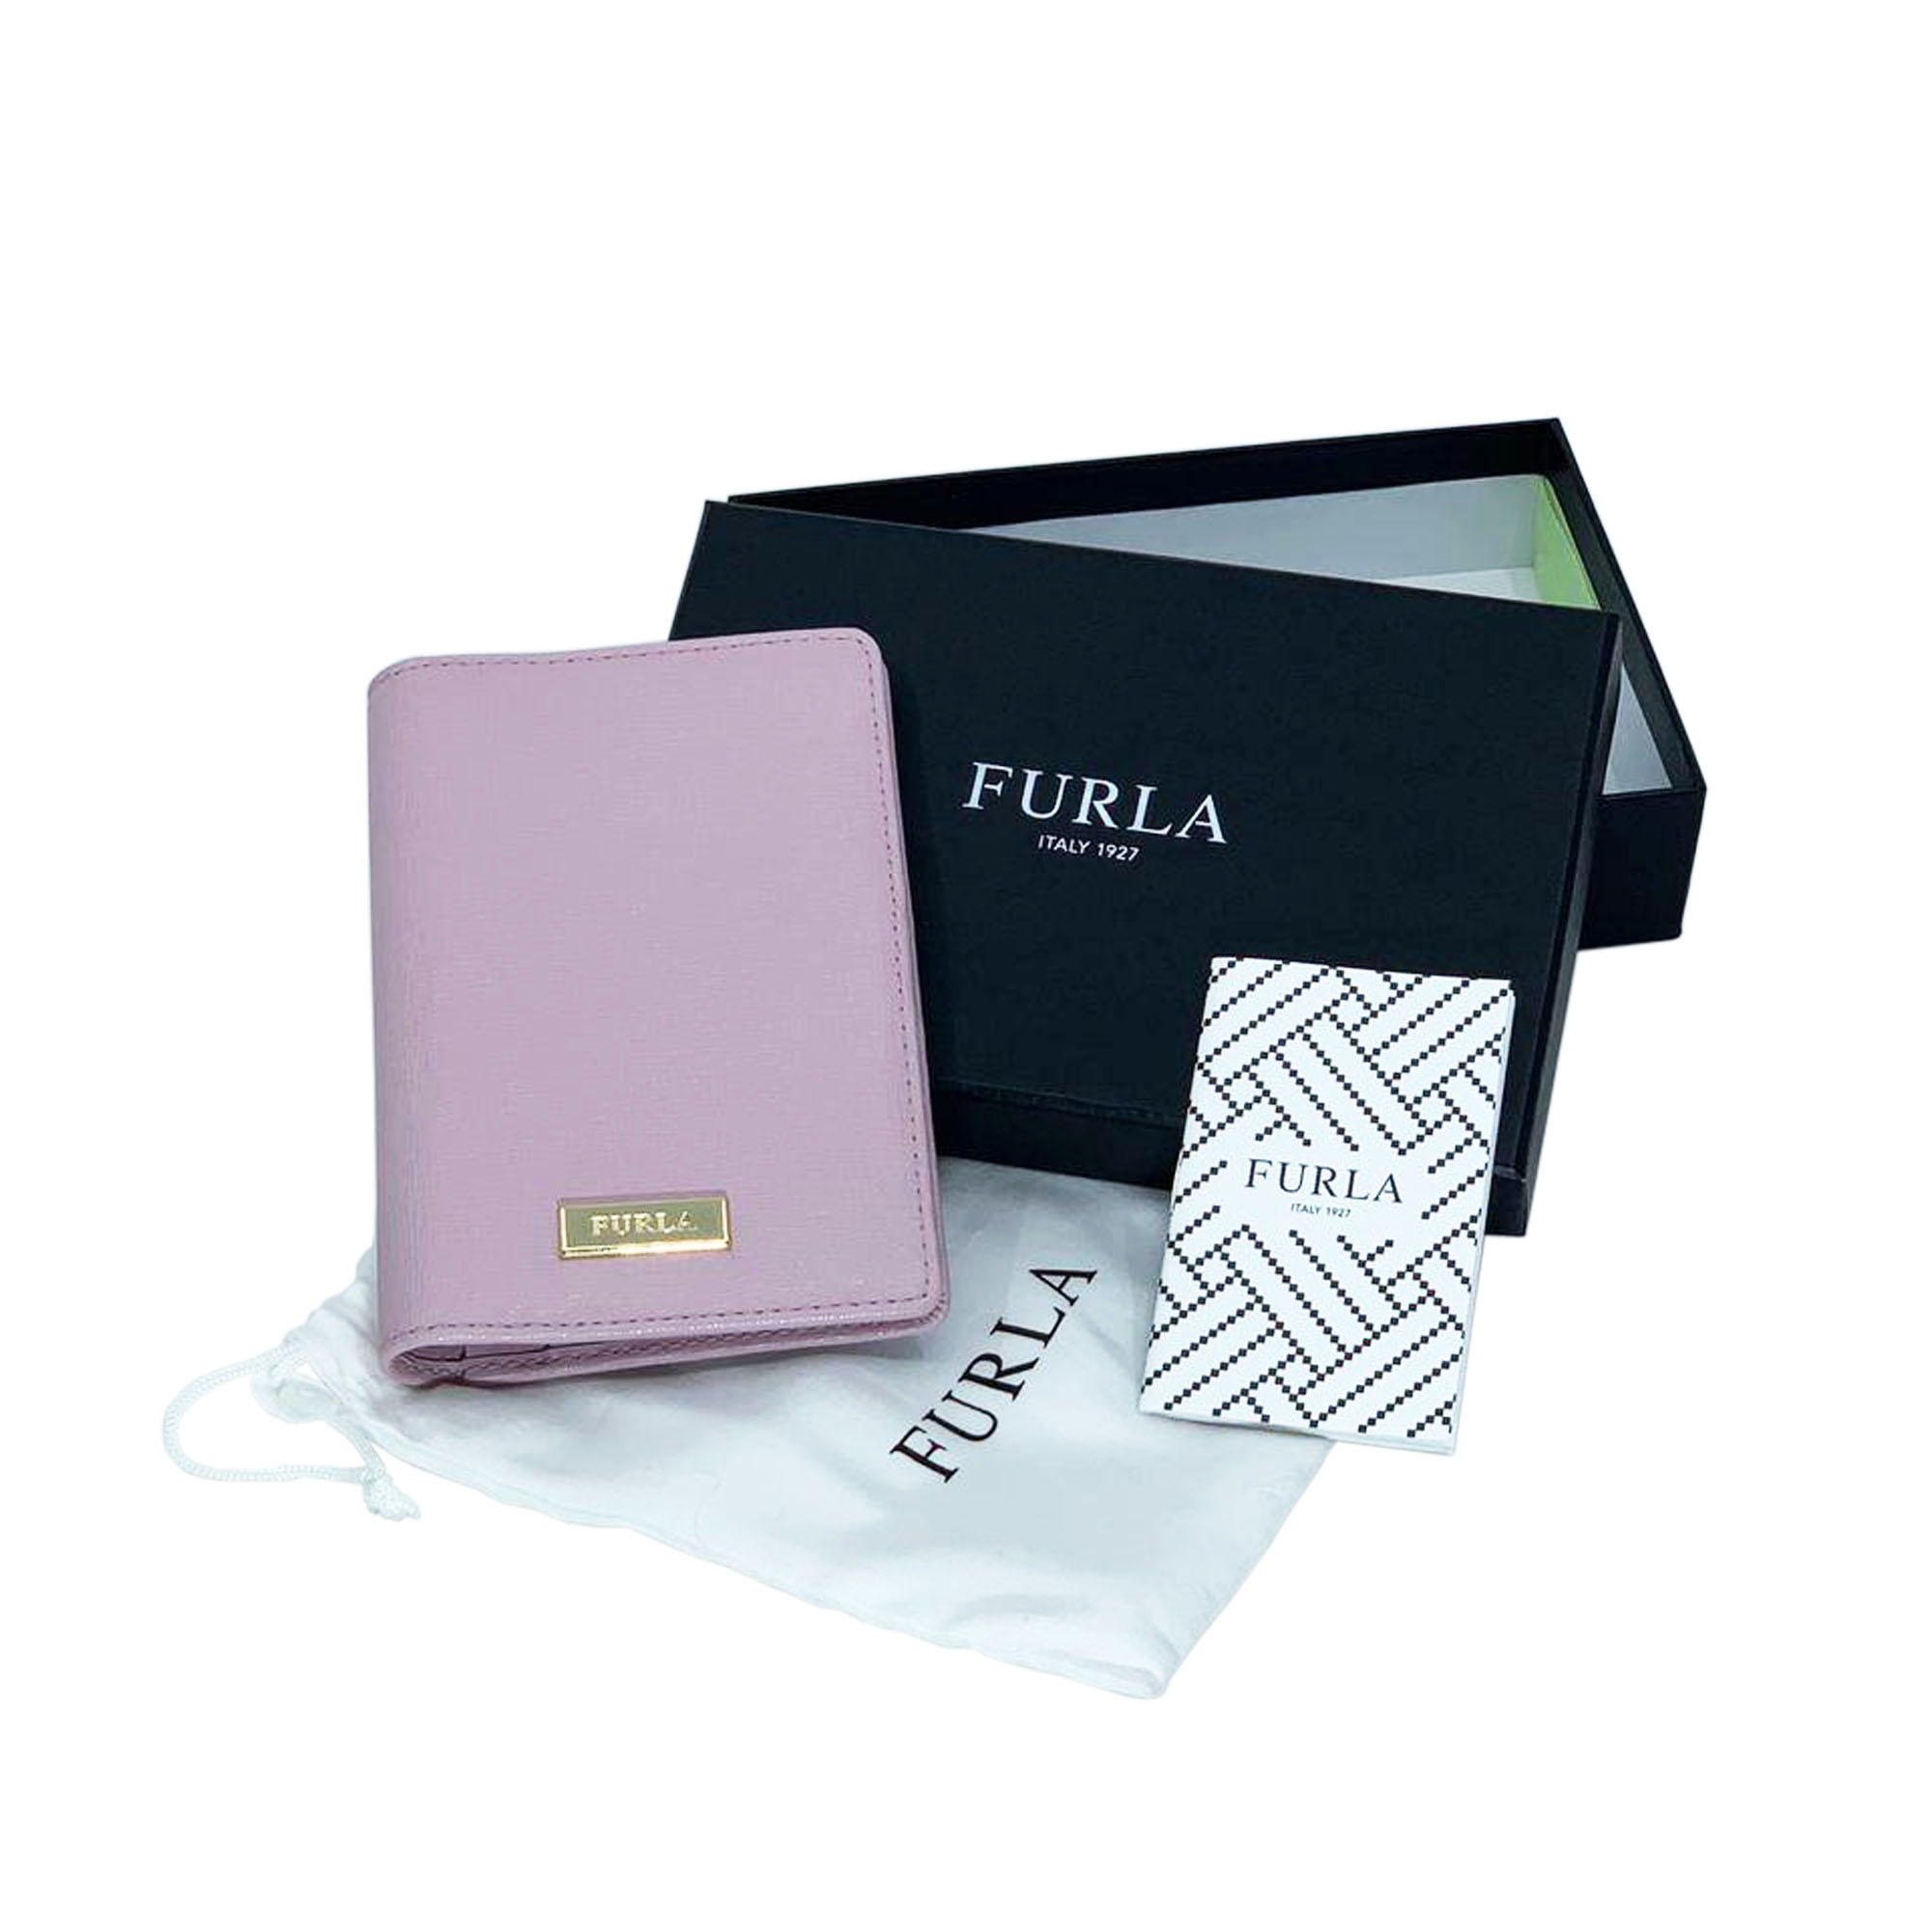 NWT FURLA Classic Small Leather Trifold Wallet Final sale